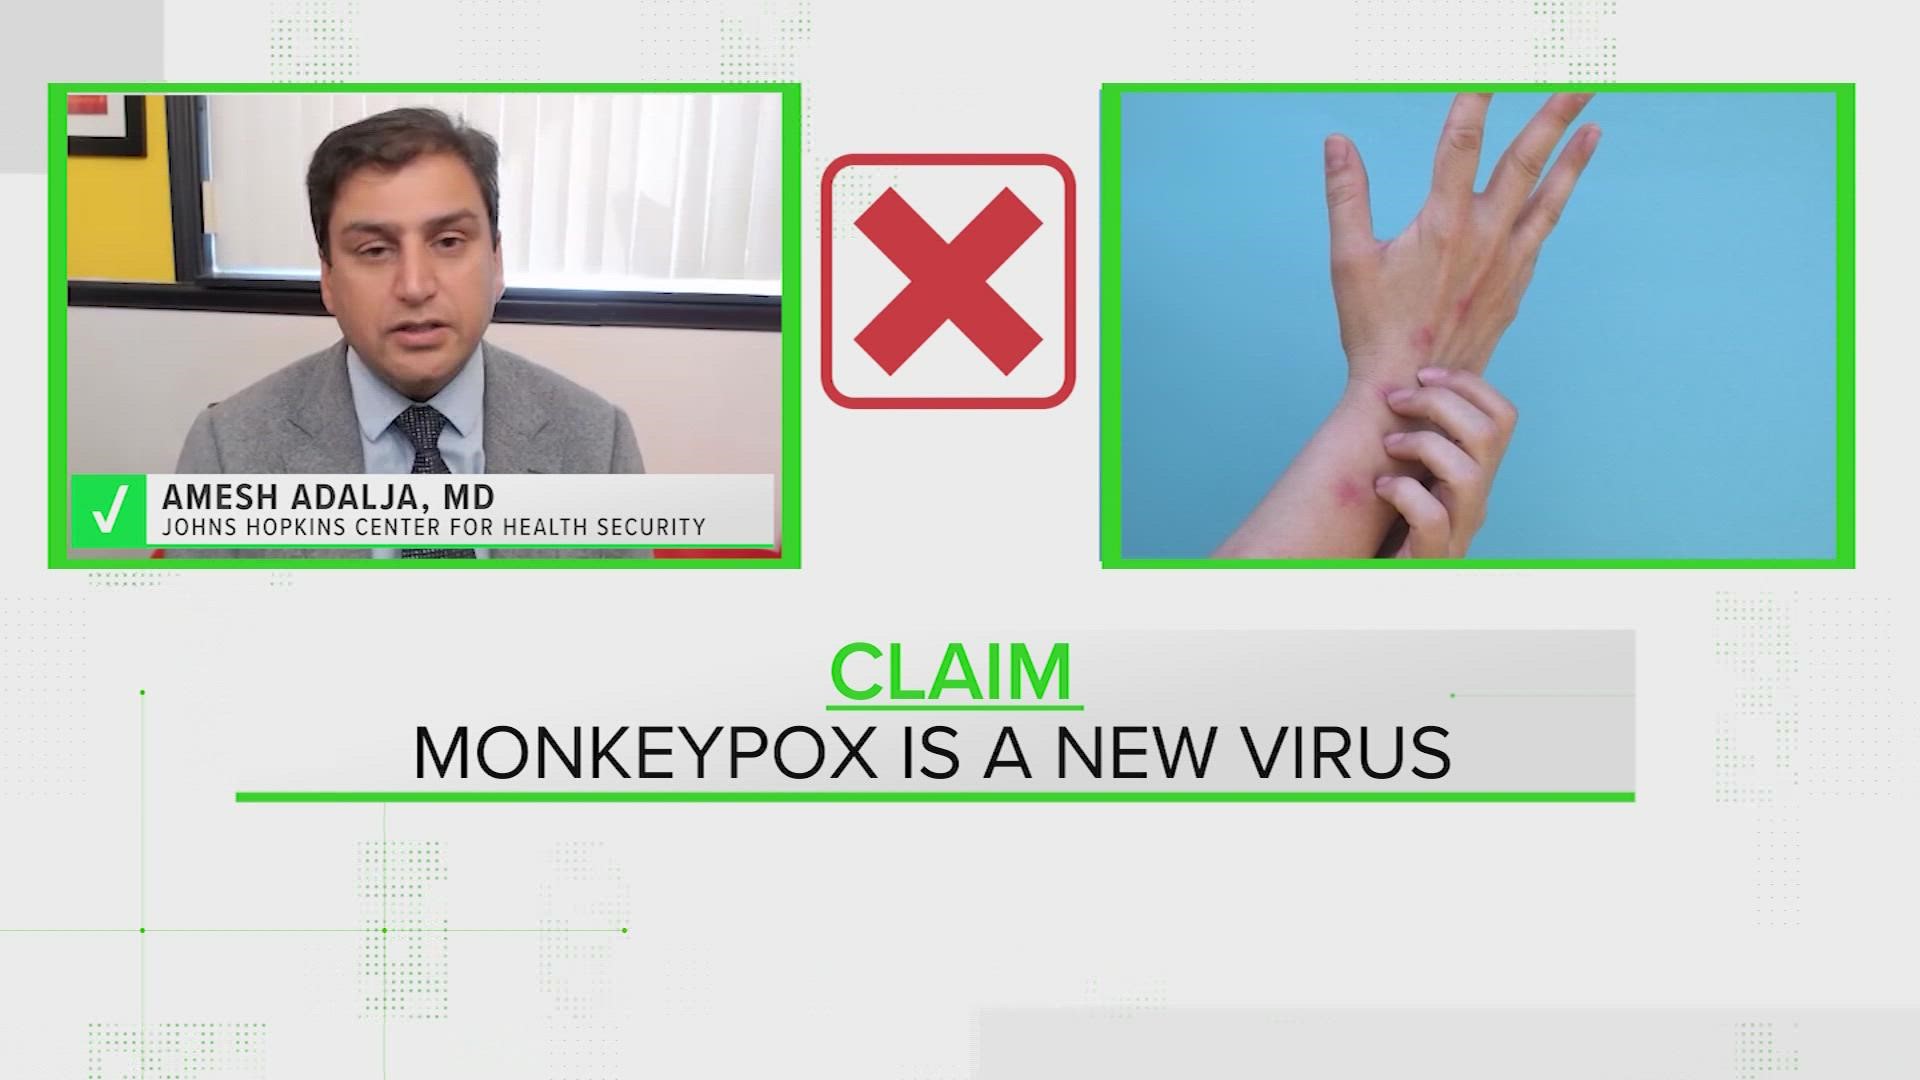 Dr. Amesh Adalja, the senior scholar at Johns Hopkins Center for Health Security, answers questions about the monkeypox.